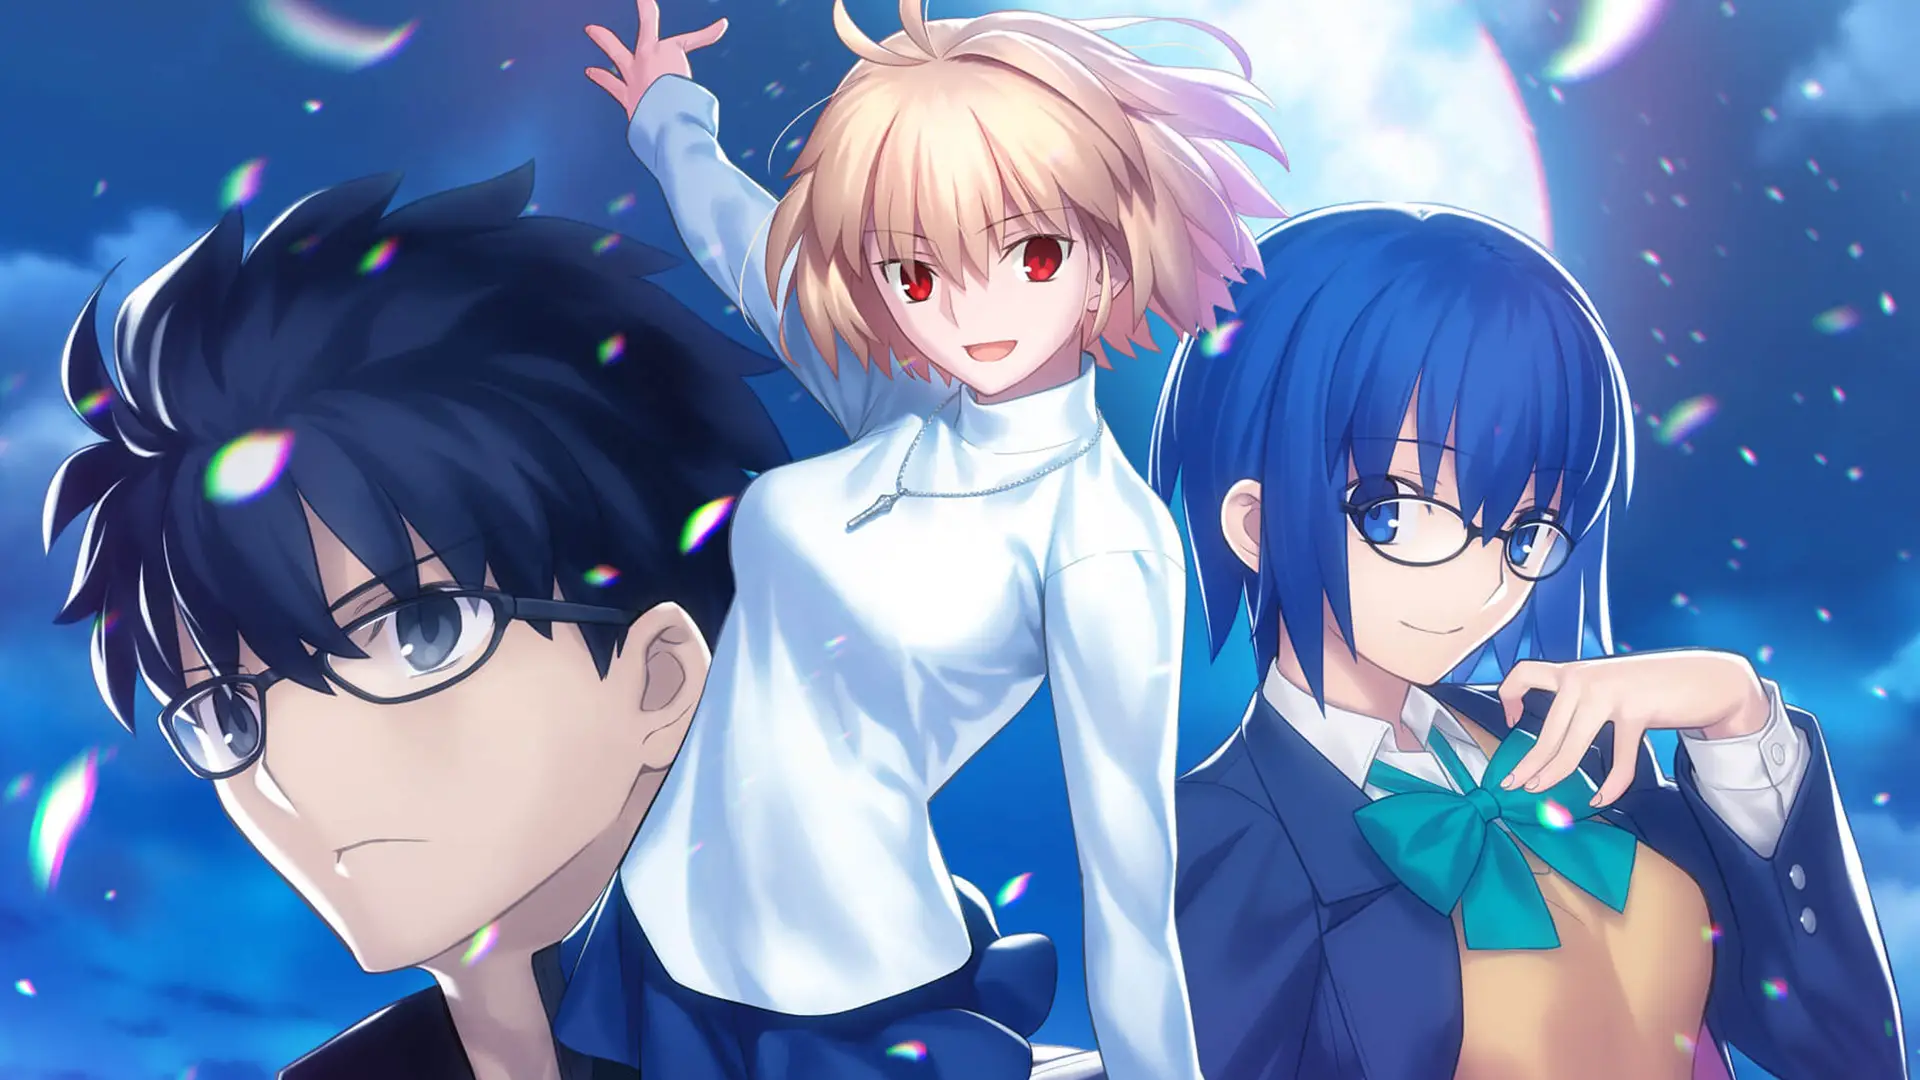 Tsukihime -A piece of blue glass moon- Limited Edition PS4 & Switch Pre-Orders Available for $79.99